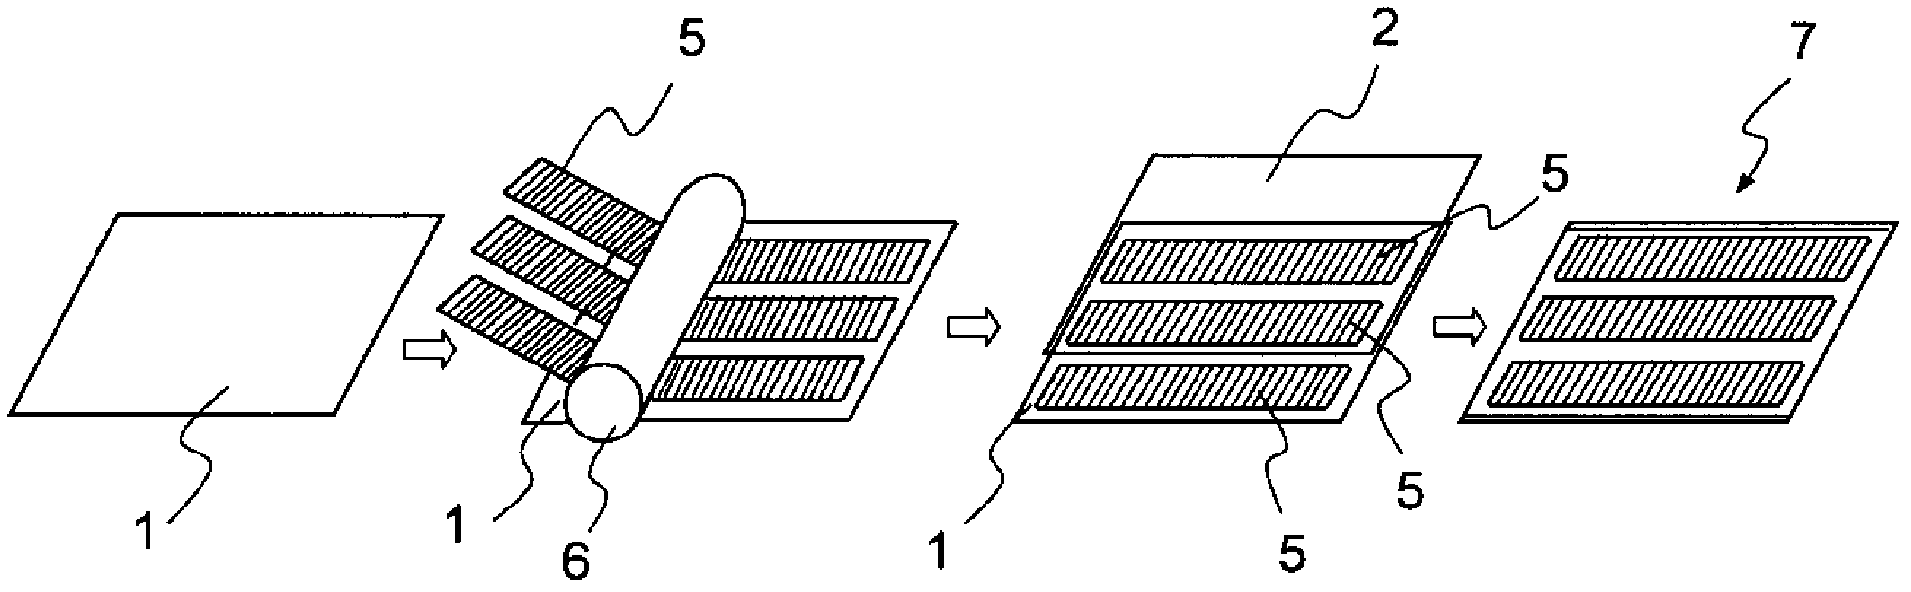 Substrate surface sealing device and organic el panel fabrication method